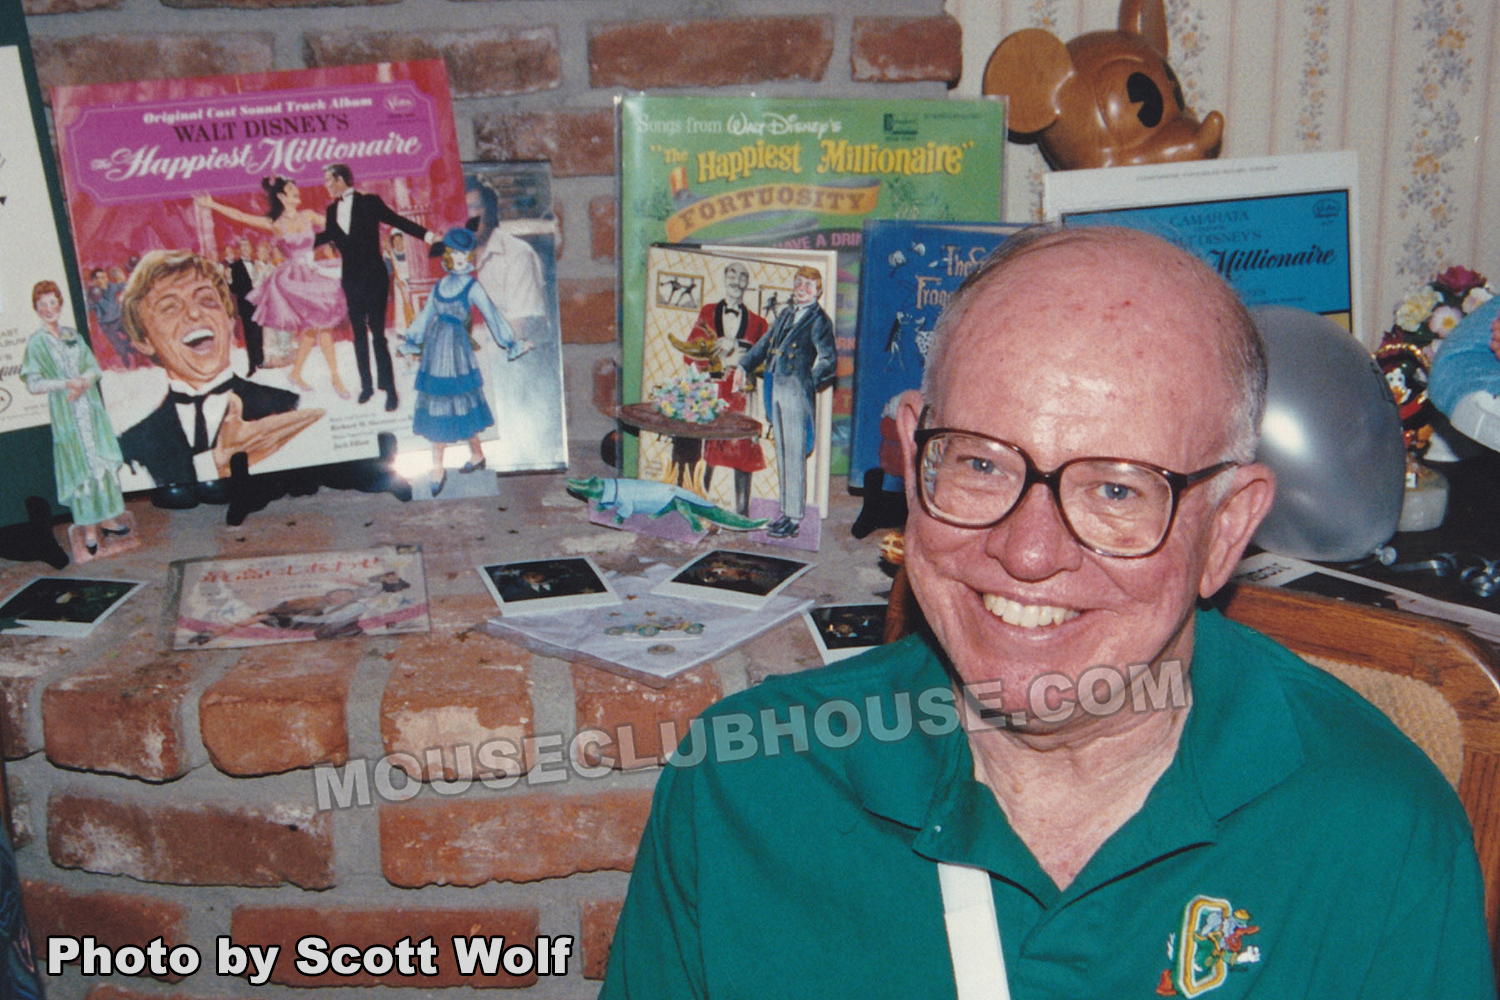 Dave Smith, founder of the Disney Archives, 1992